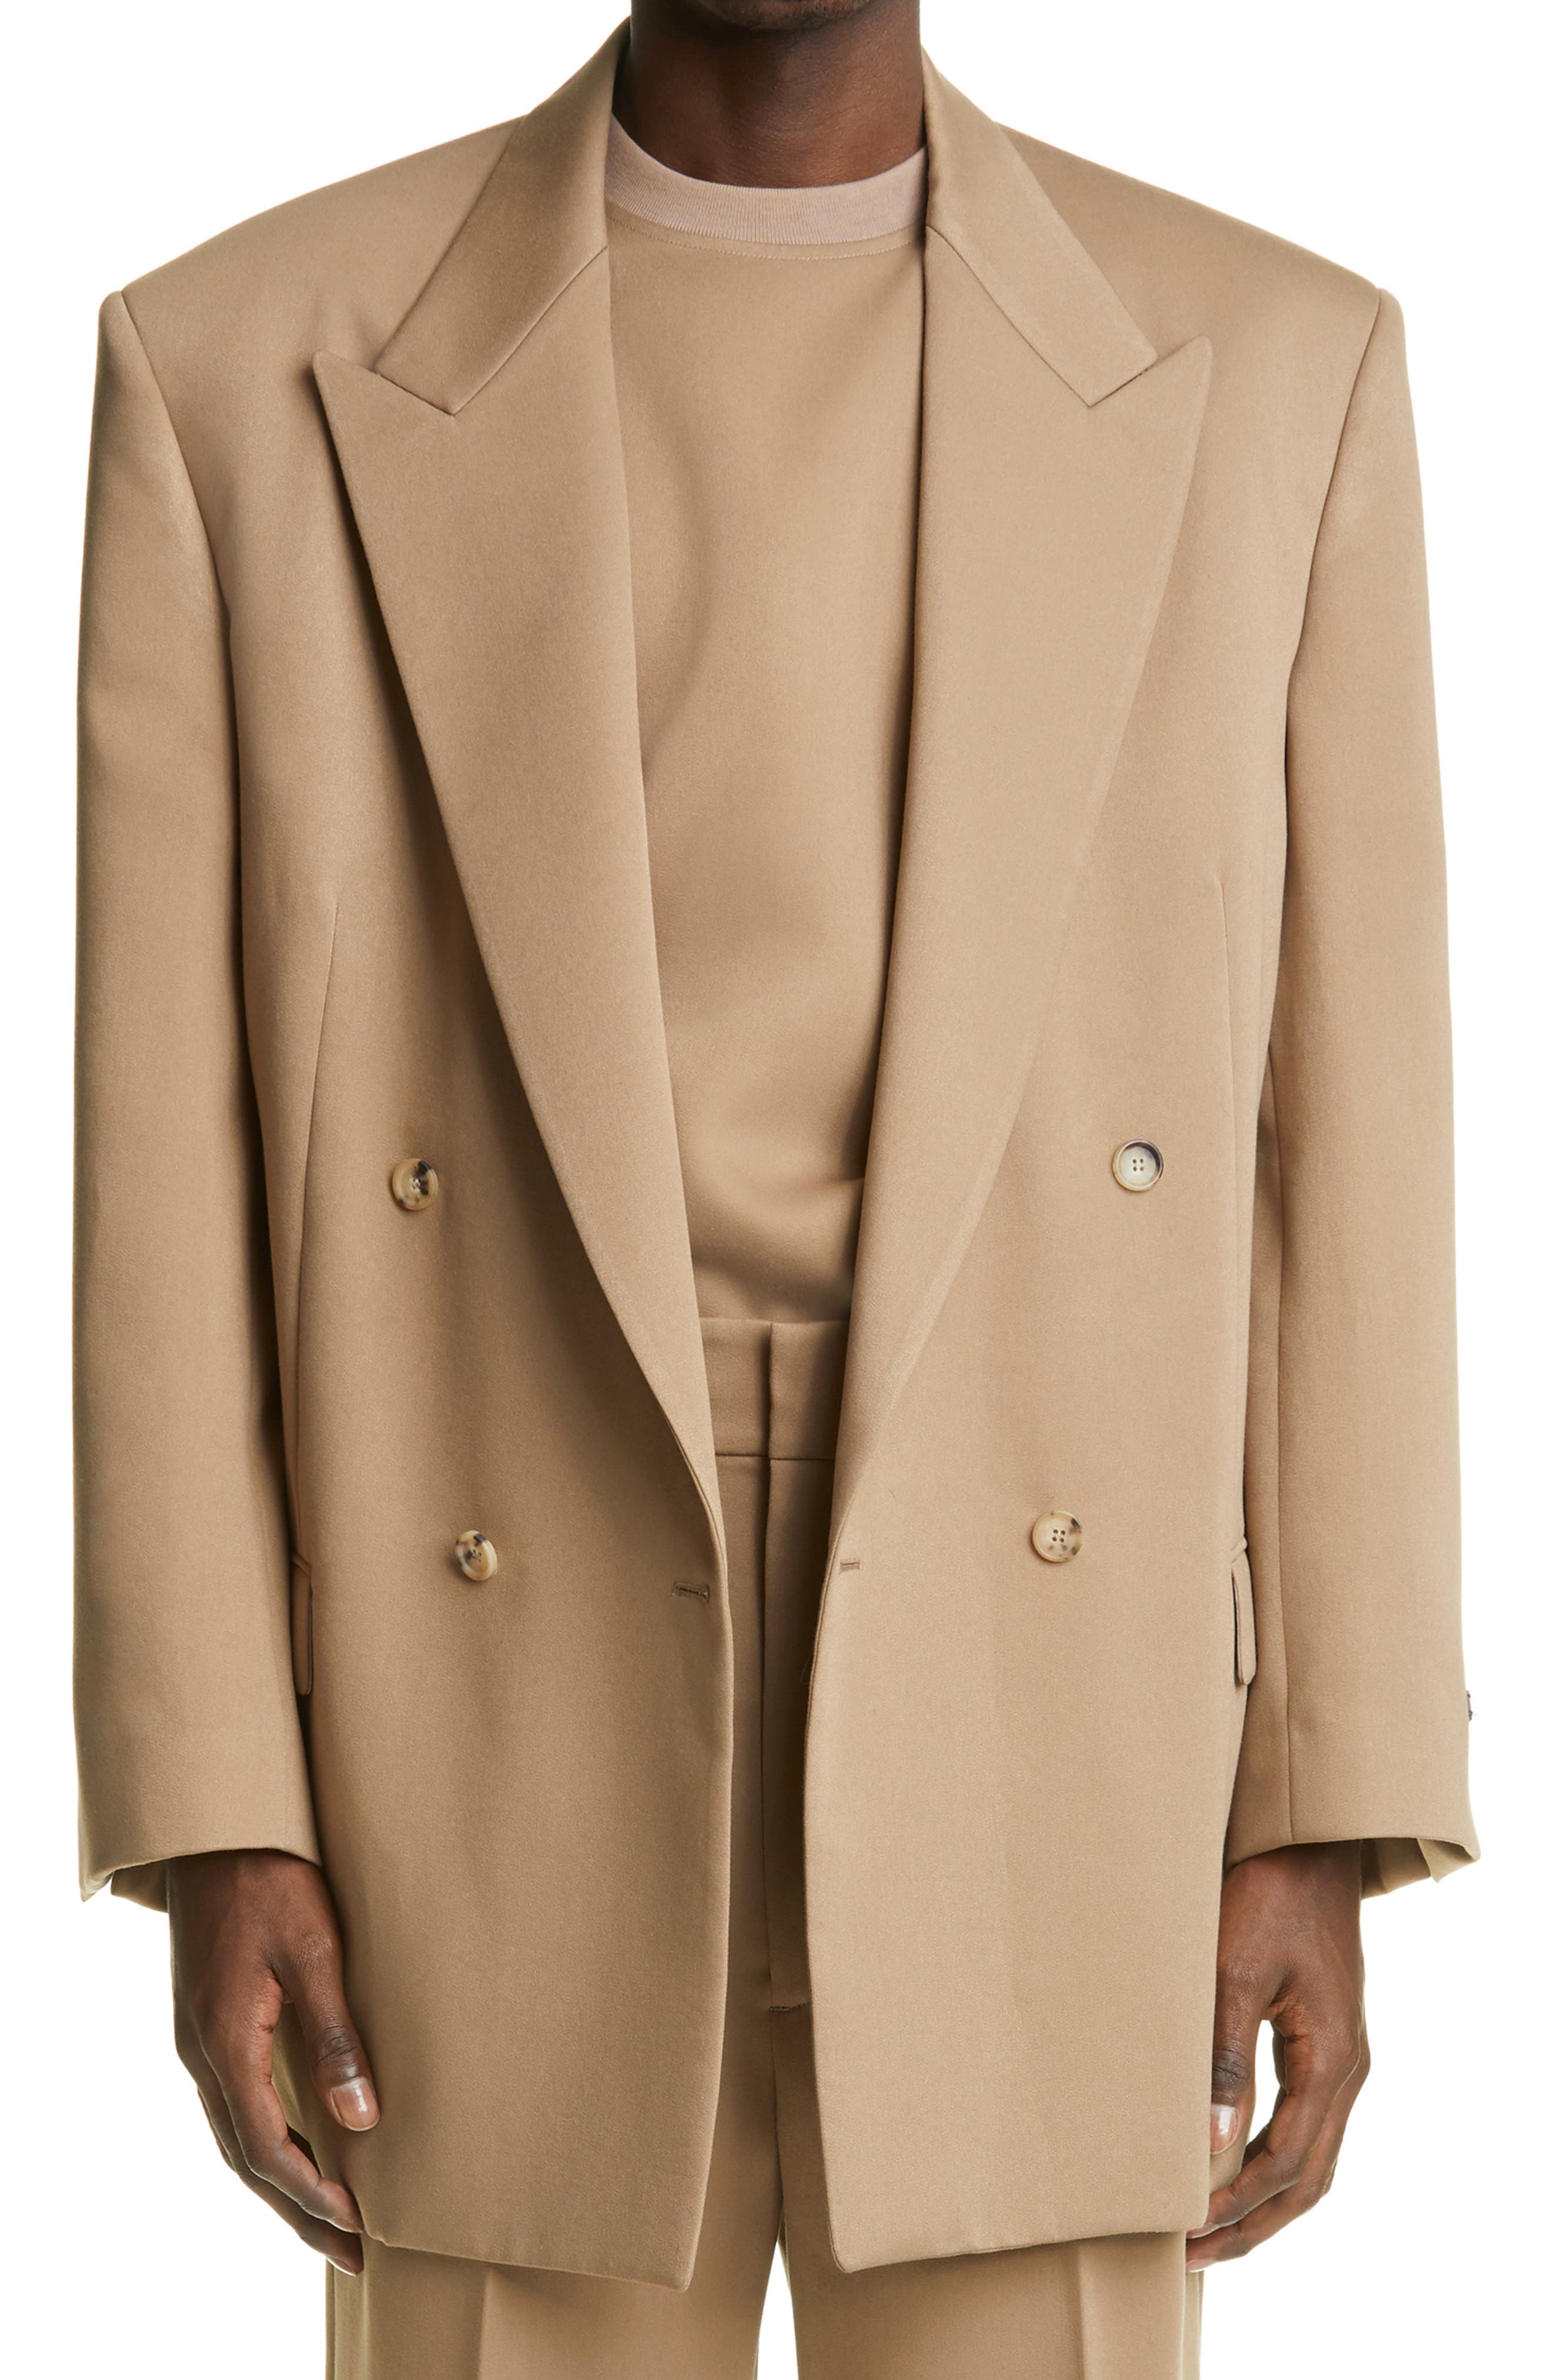 Fear of God California Oversize Blazer in Taupe at Nordstrom, Size 34 Us